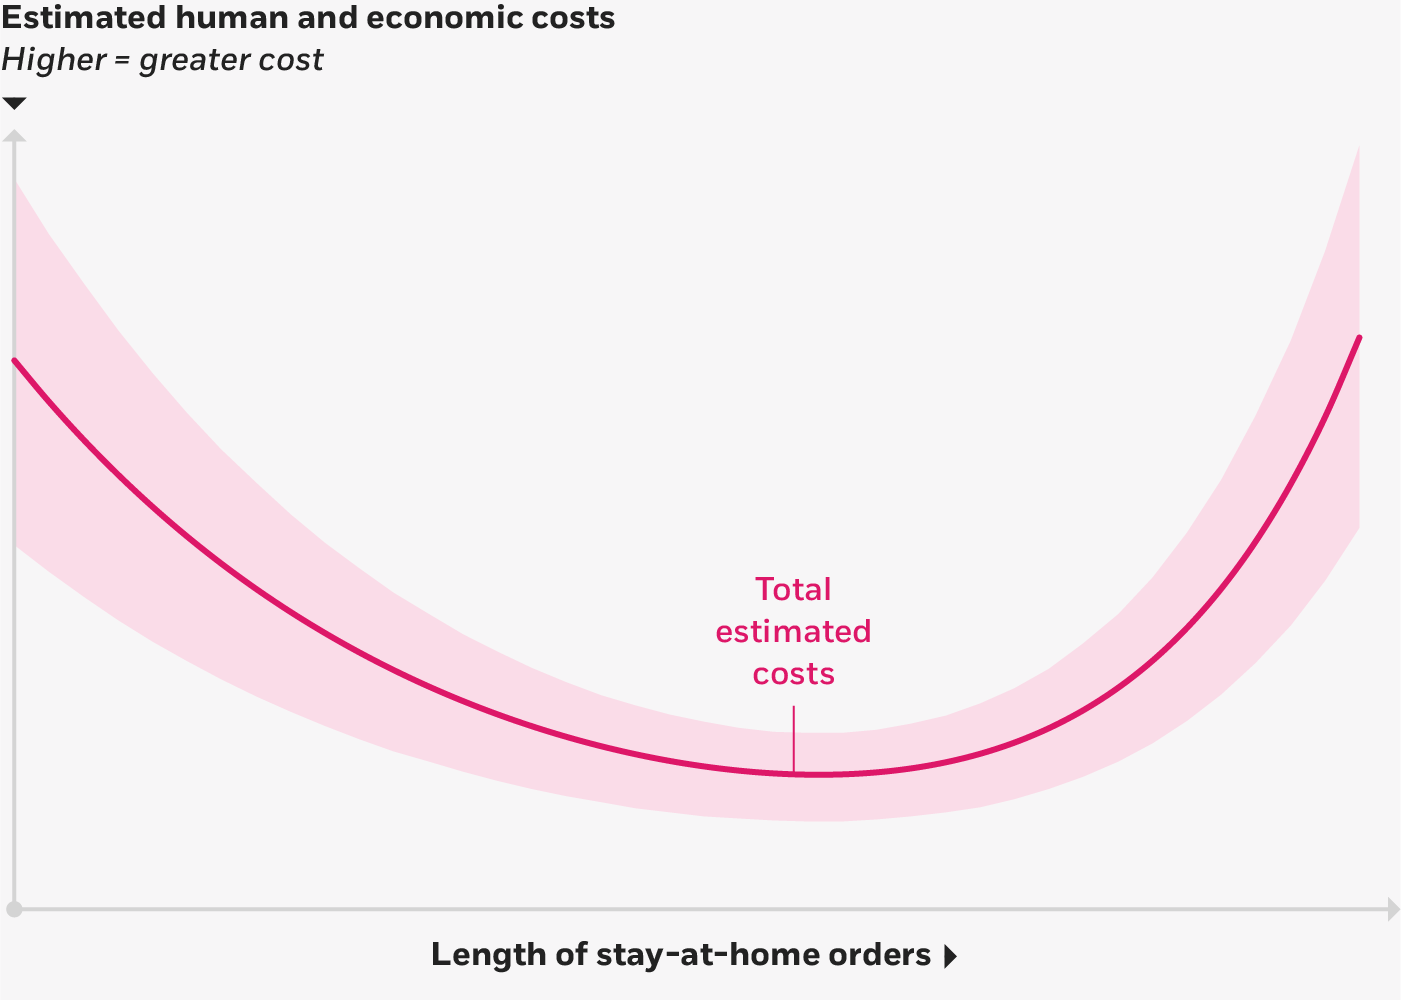 Another line diagram like the others, showing rising estimated human and economic costs on the y-axis and increasing length of stay-at-home orders on the x-axis. The trends curves for falling COVID-19 related costs and rising quarantine-related net costs are replicated, but they include confidence bands, which are wider at the beginning for COVID-19 costs and wider at the end for quarantine costs.